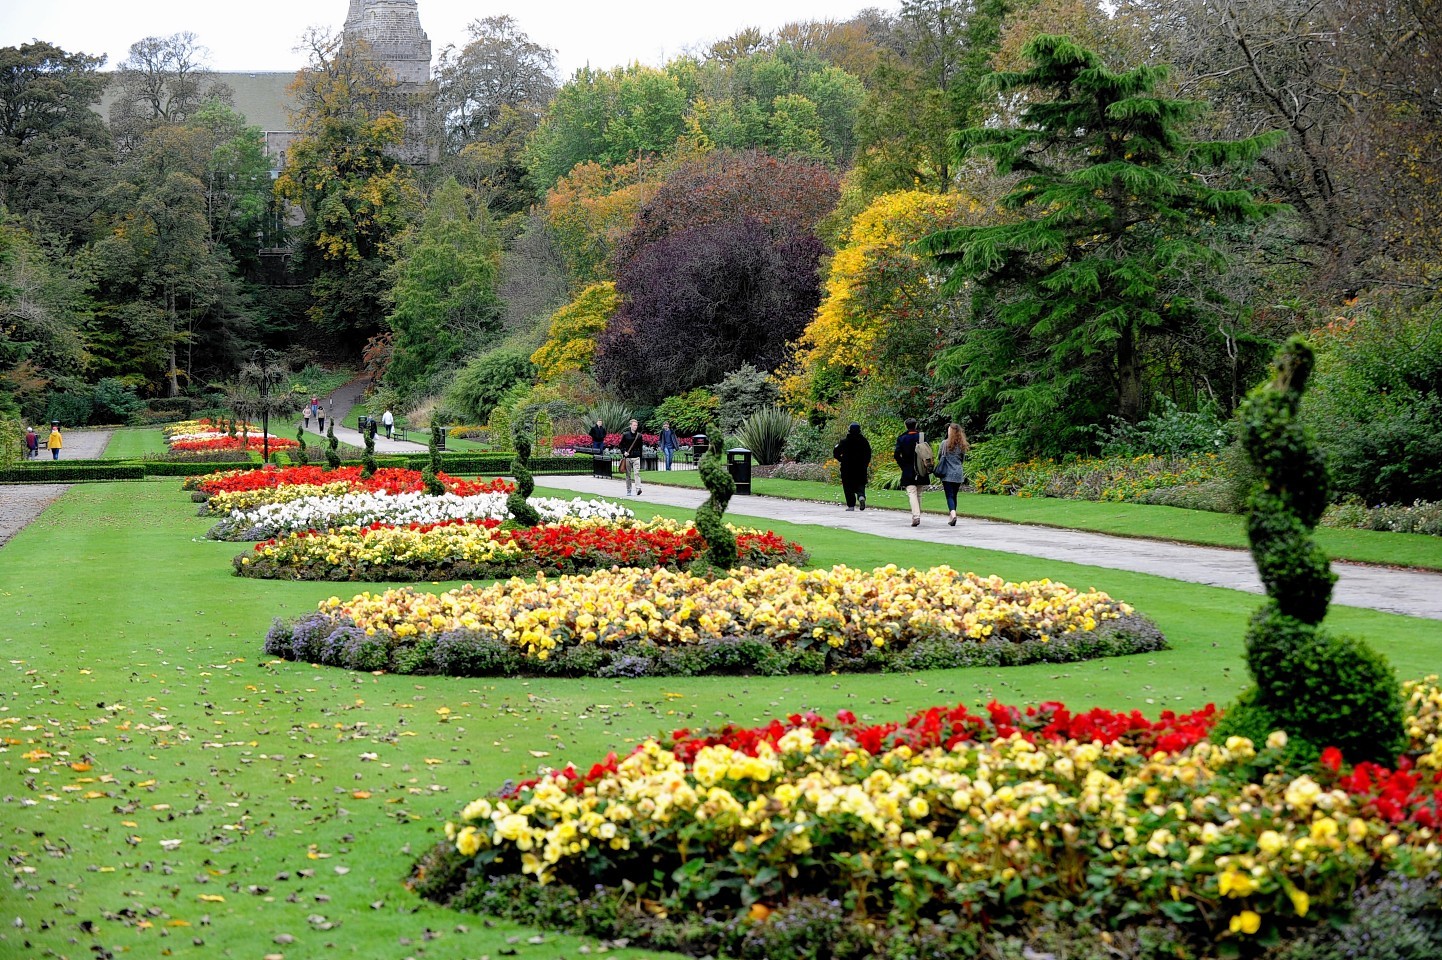 Aberdeen's parks and gardens bagged top prize at the Britain in Bloom in 2014